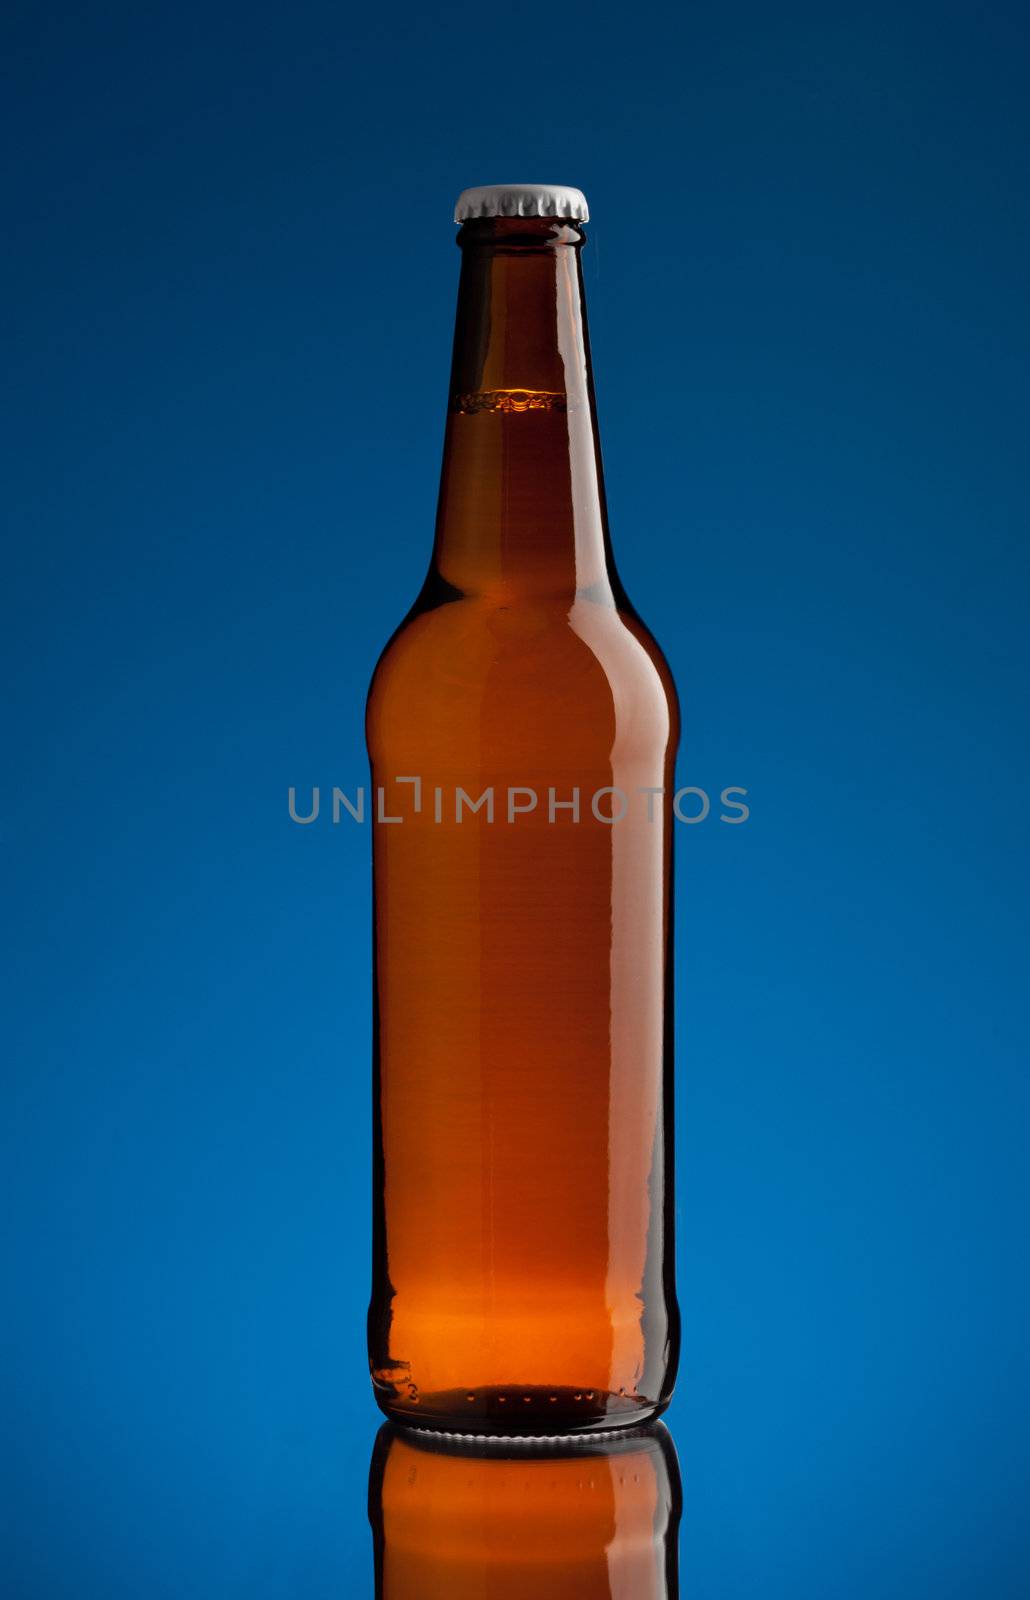 brown bottle with beer over blue background